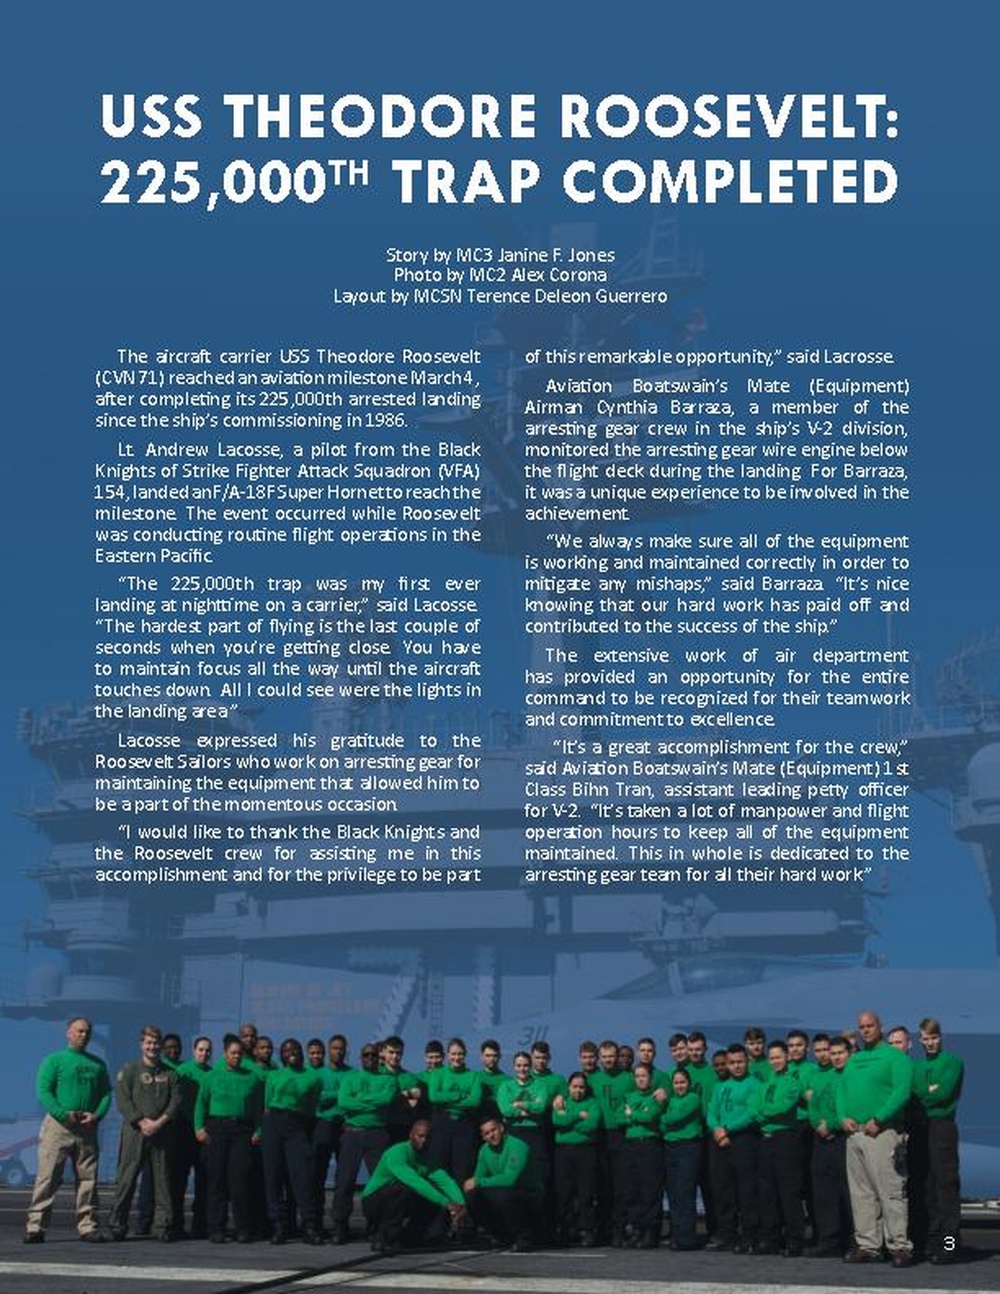 USS Theodore Roosevelt 225,000th Trap Completed